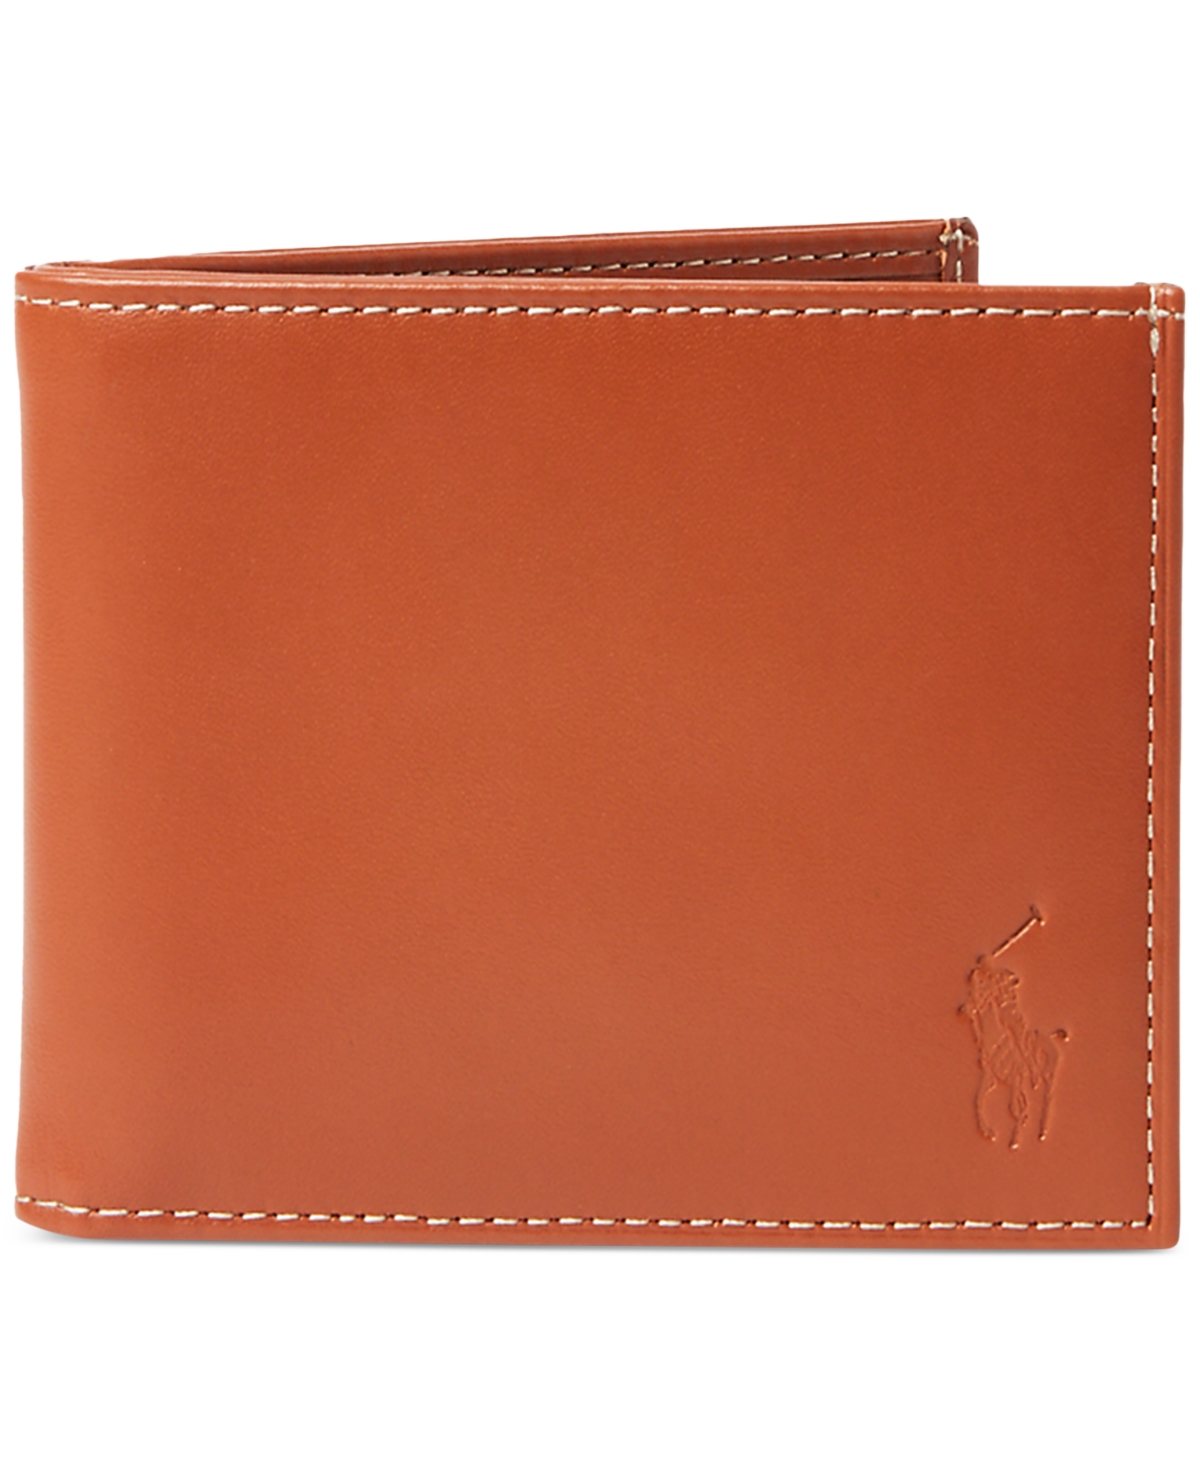 Polo Ralph Lauren Burnished Leather Bifold Wallet In Brown